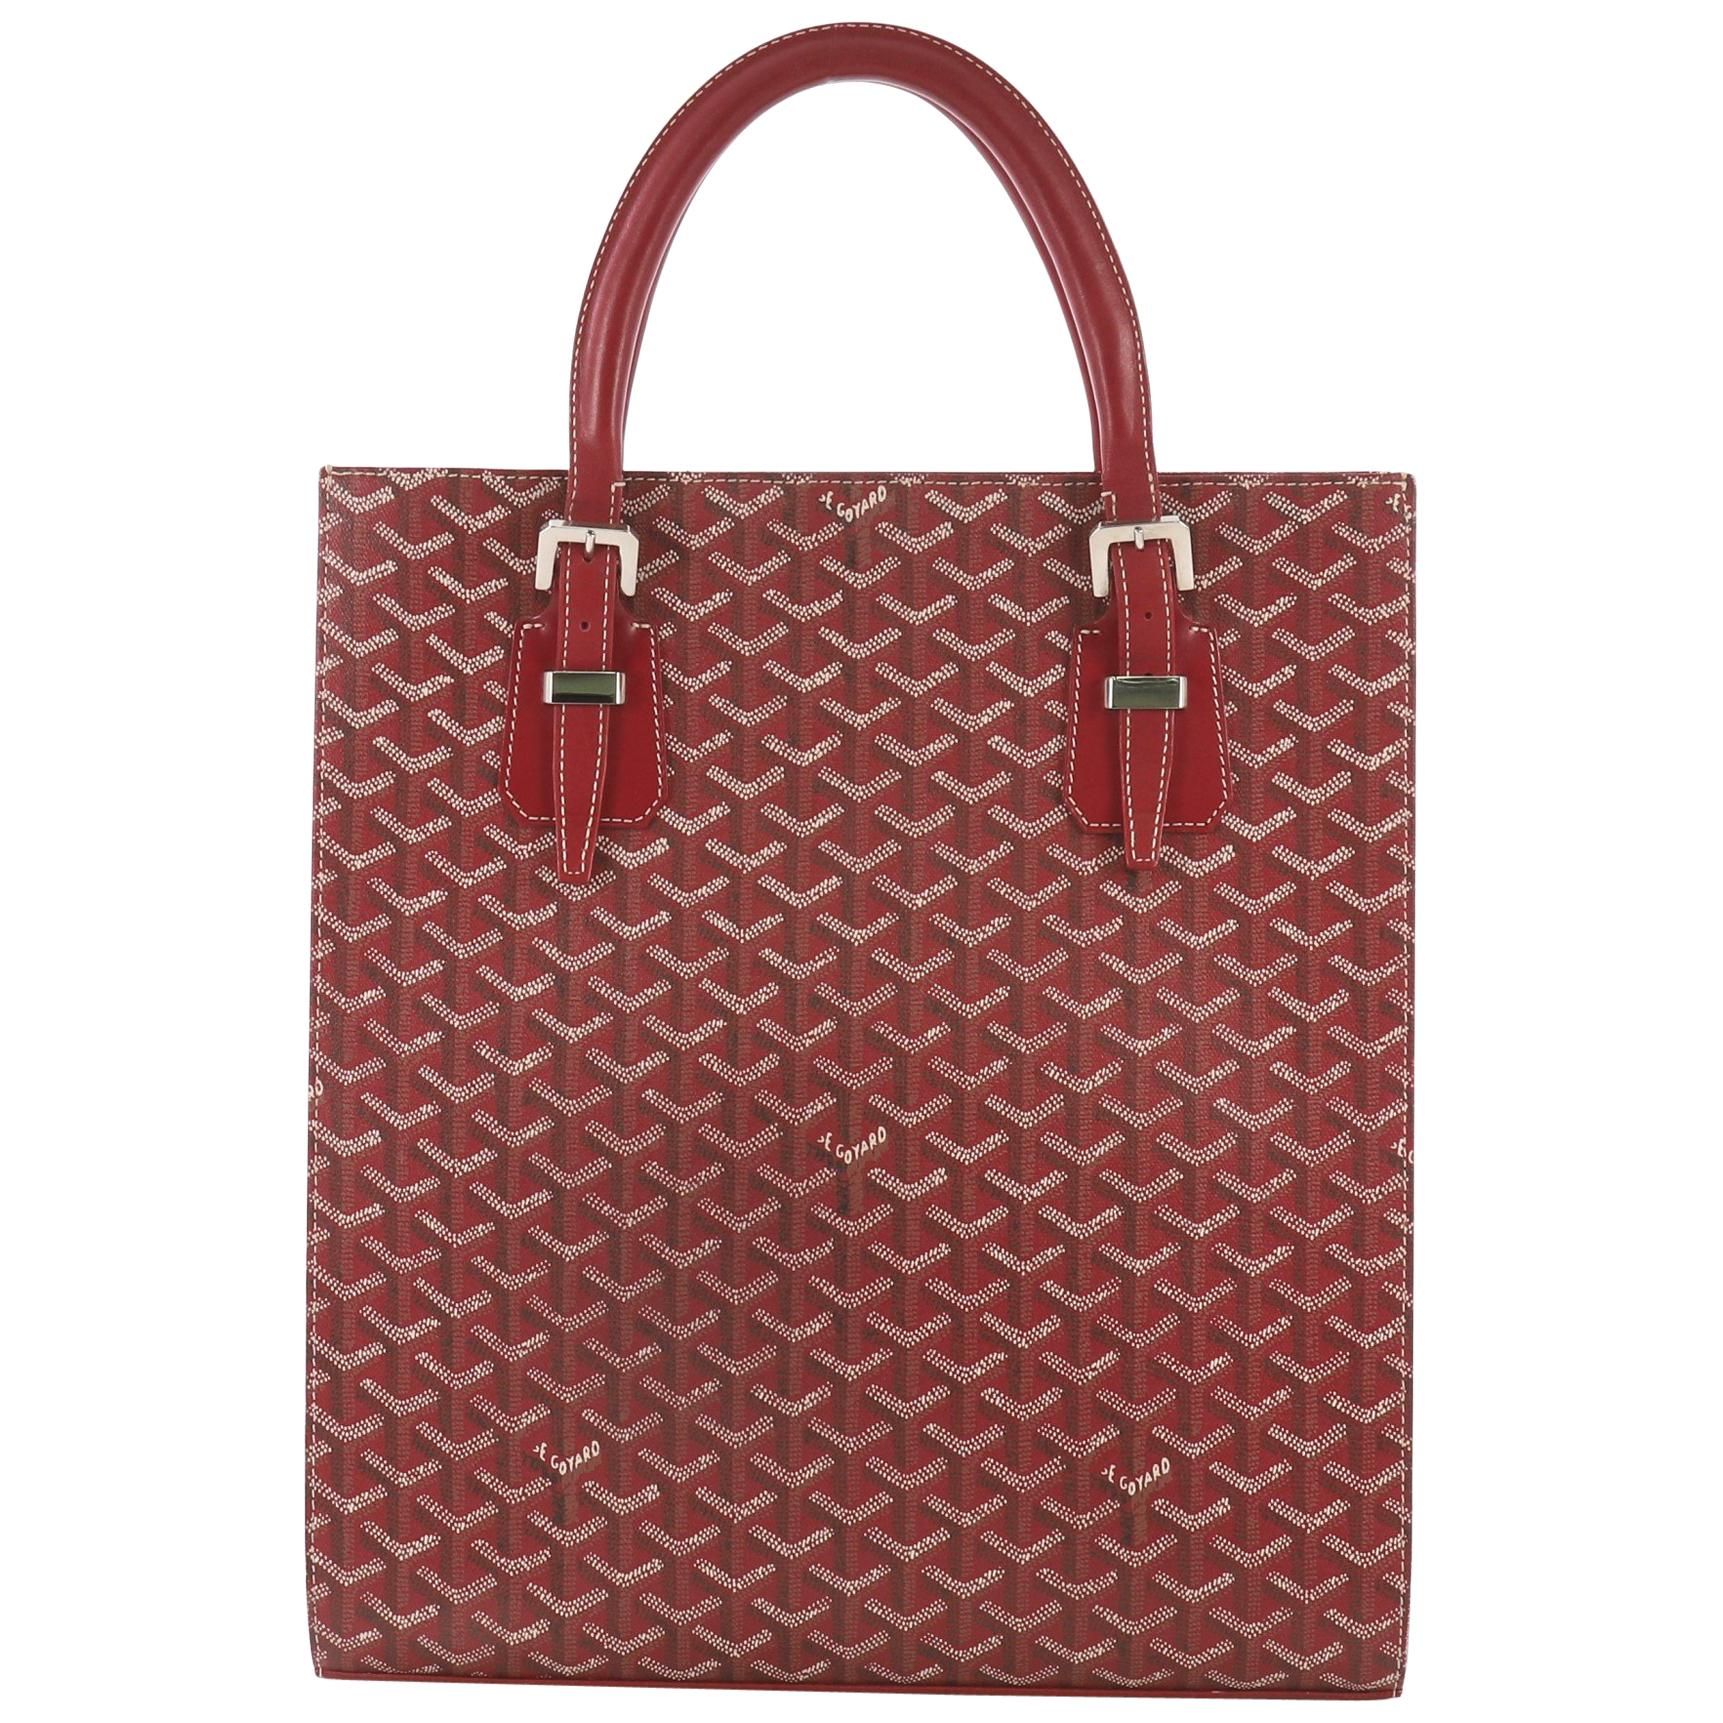 Goyard handles coming out like clay and staining everything